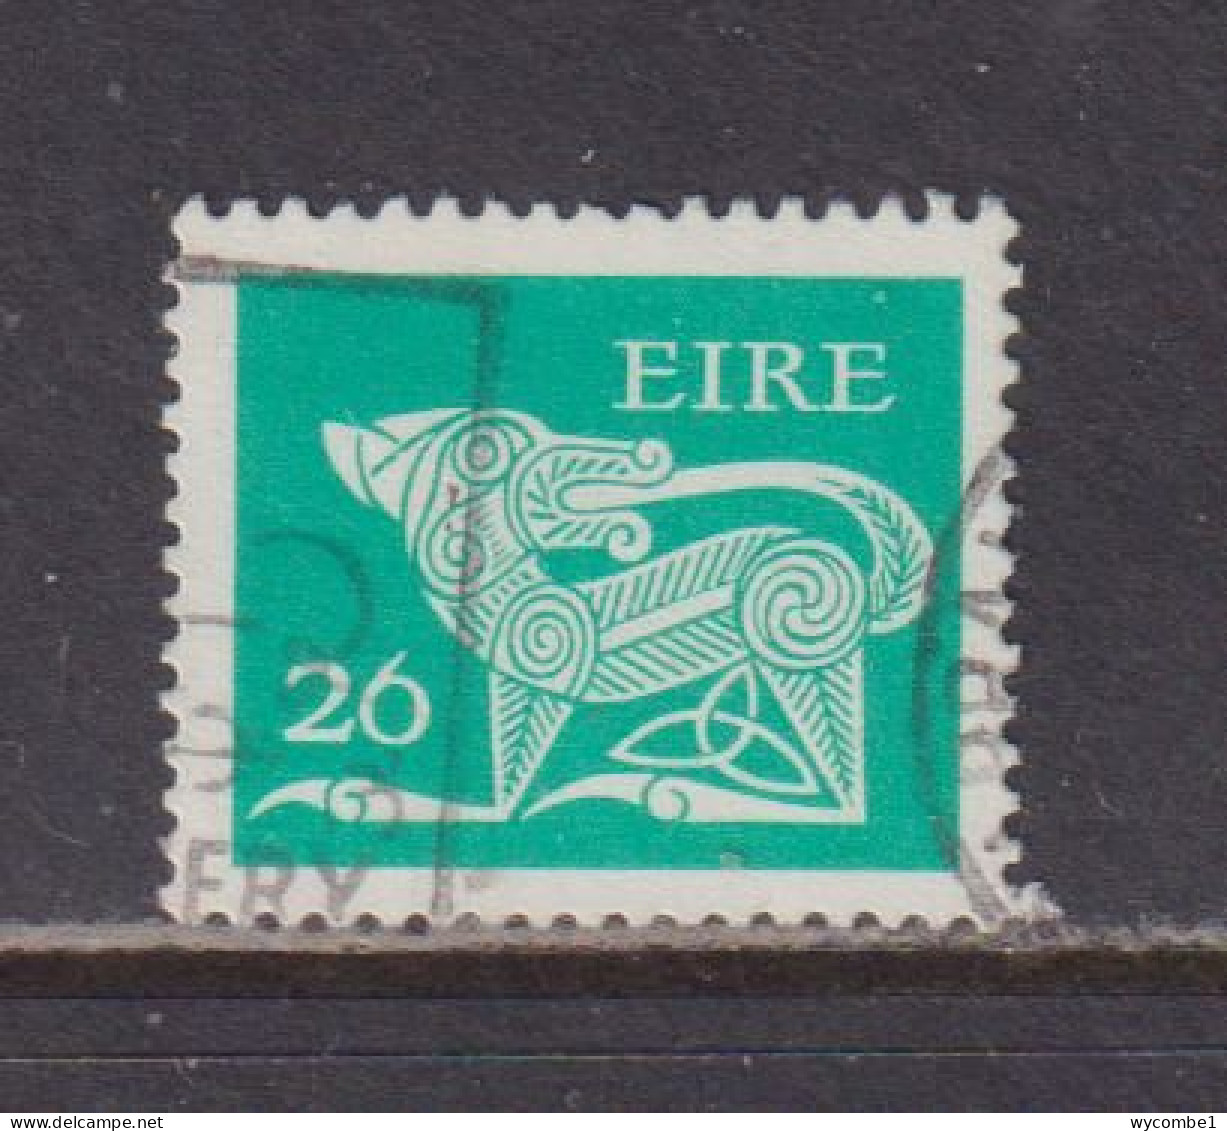 IRELAND - 1971  Decimal Currency Definitives  26p  Used As Scan - Used Stamps